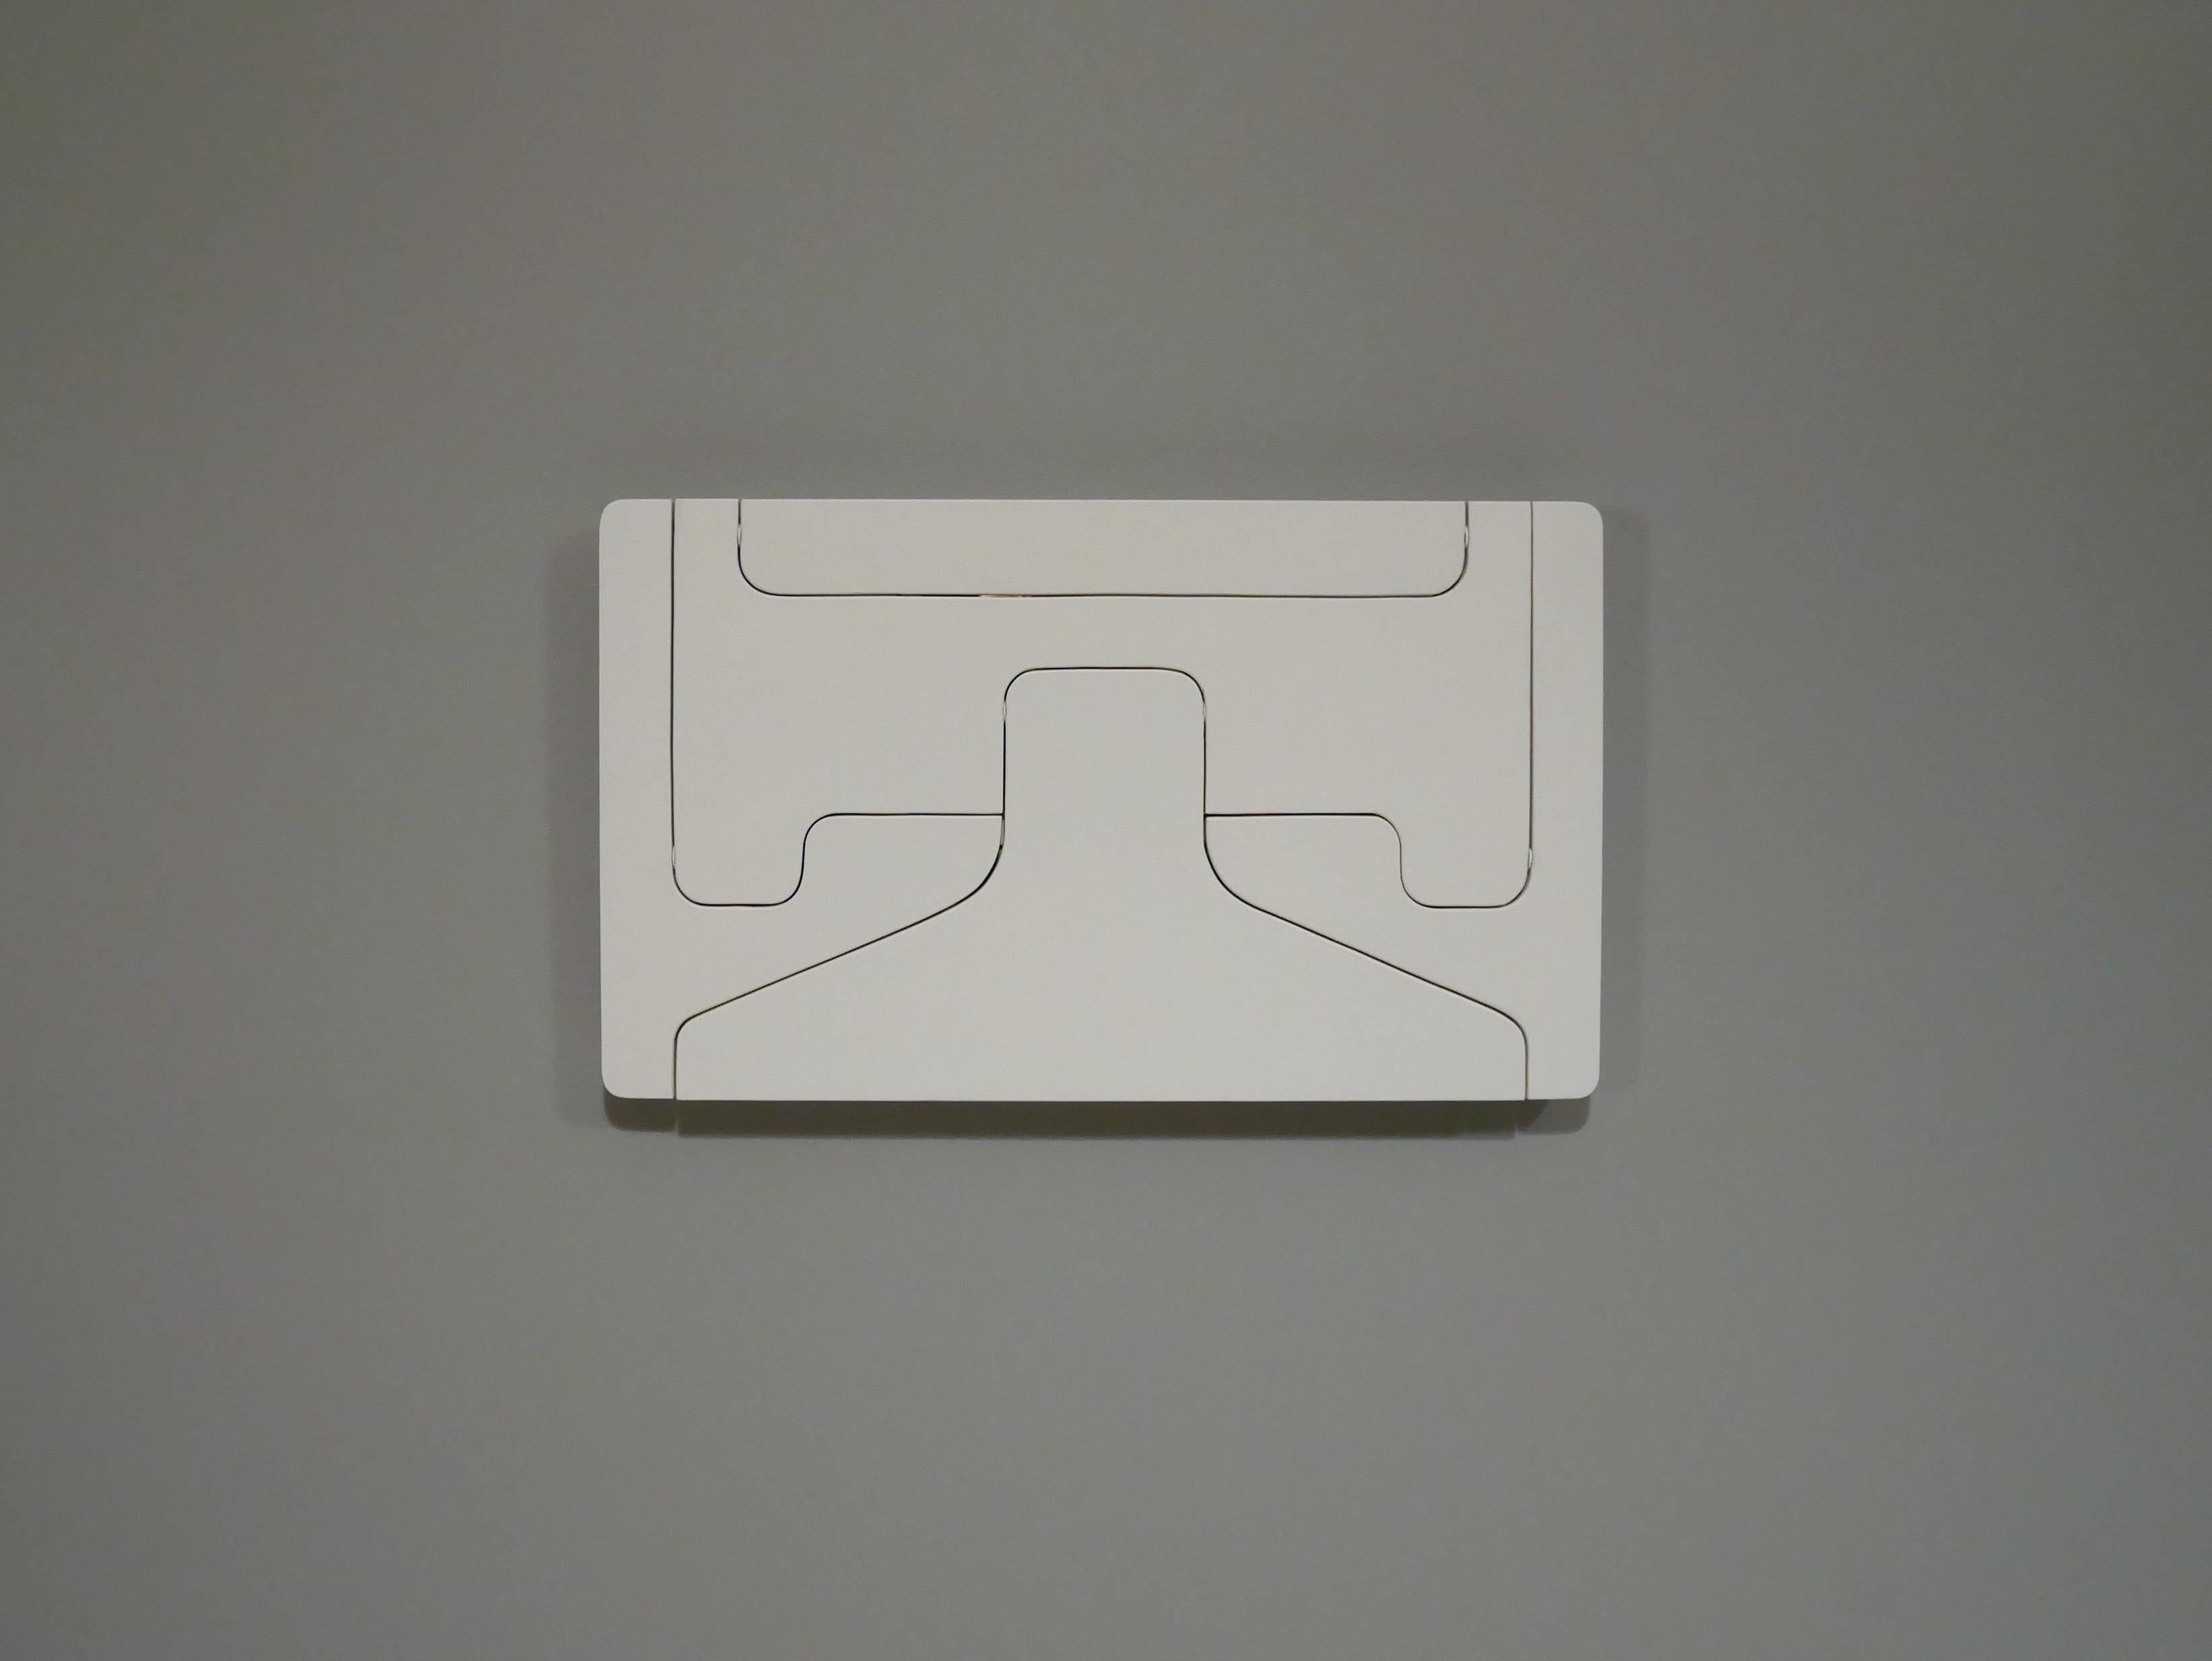 Lindau & Lindekrantz wall mounted clothes valet, Sweden, 1970s
Designed for Blå station.
White lacquered plywood with built in mirror in the top part.
Two different models made, one for clothes and one for accessories.